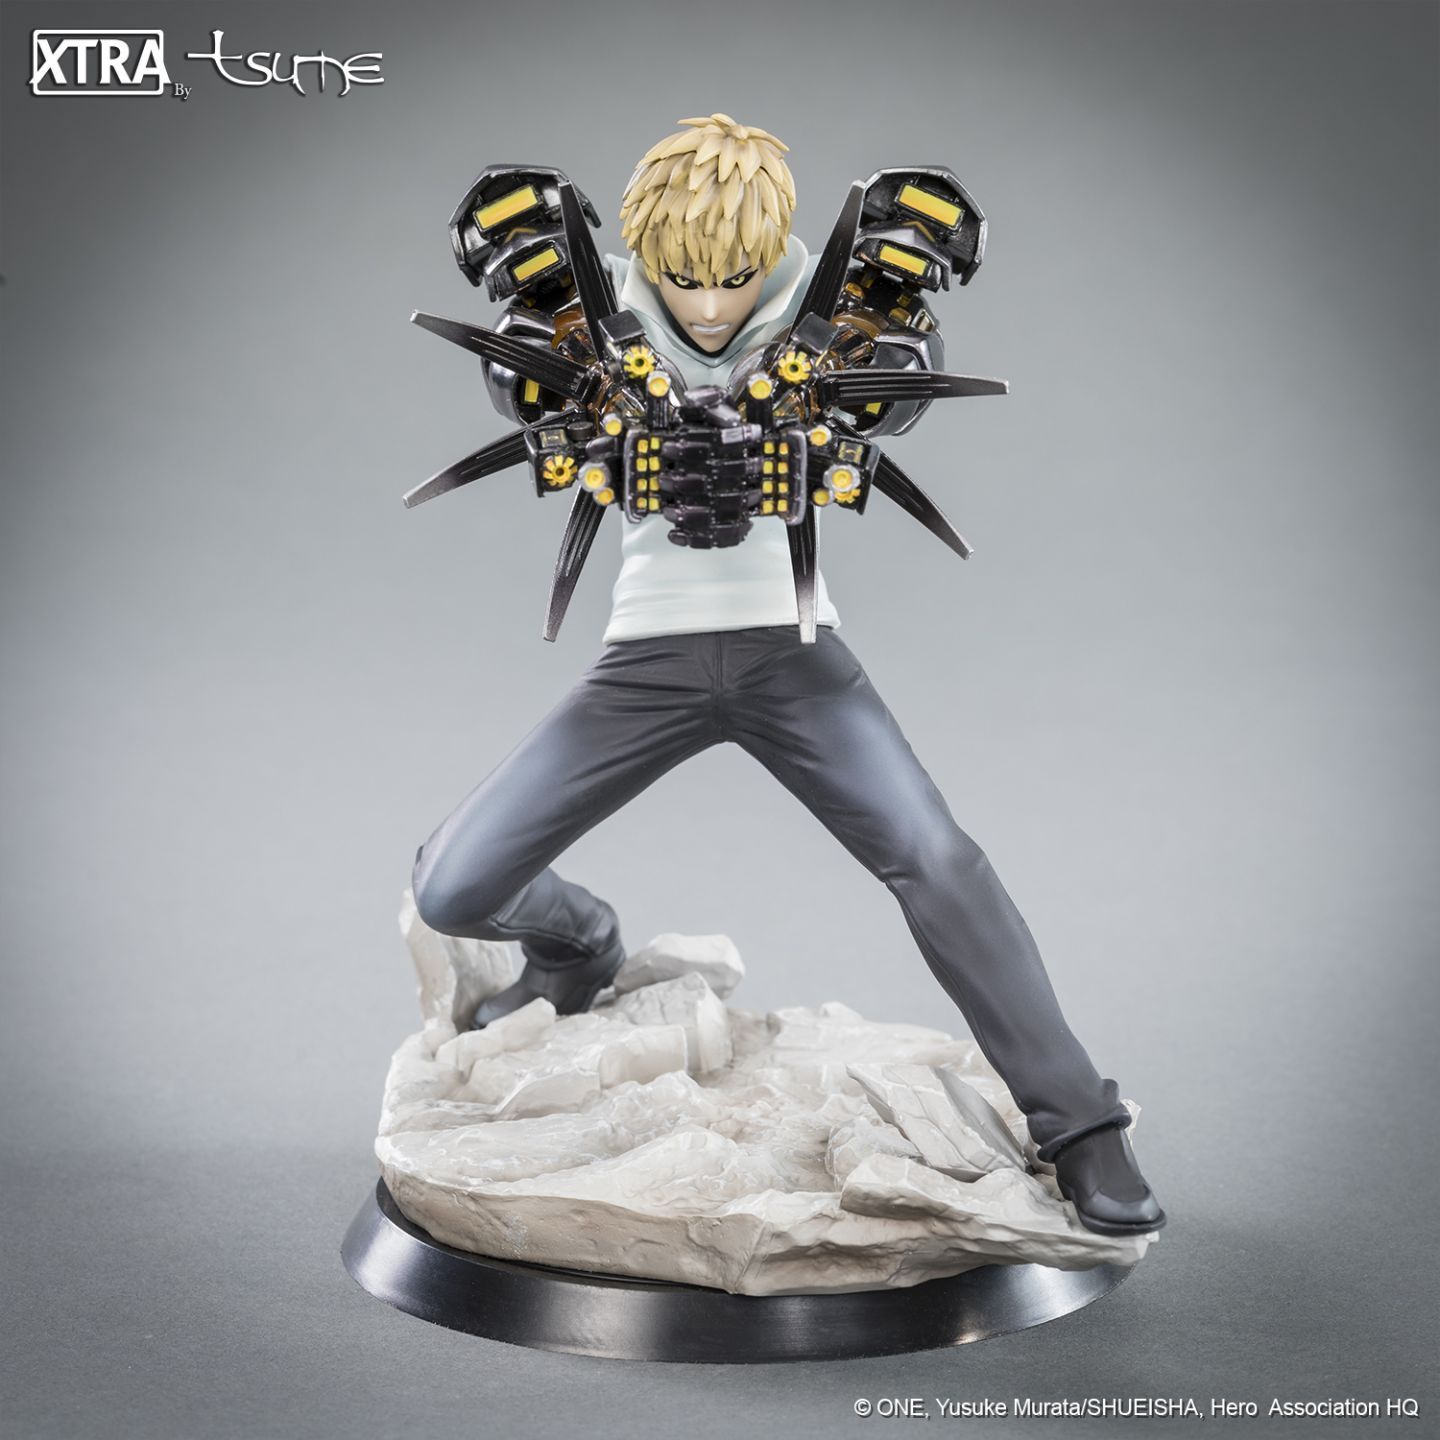 goodie - Genos - X-tra by Tsume